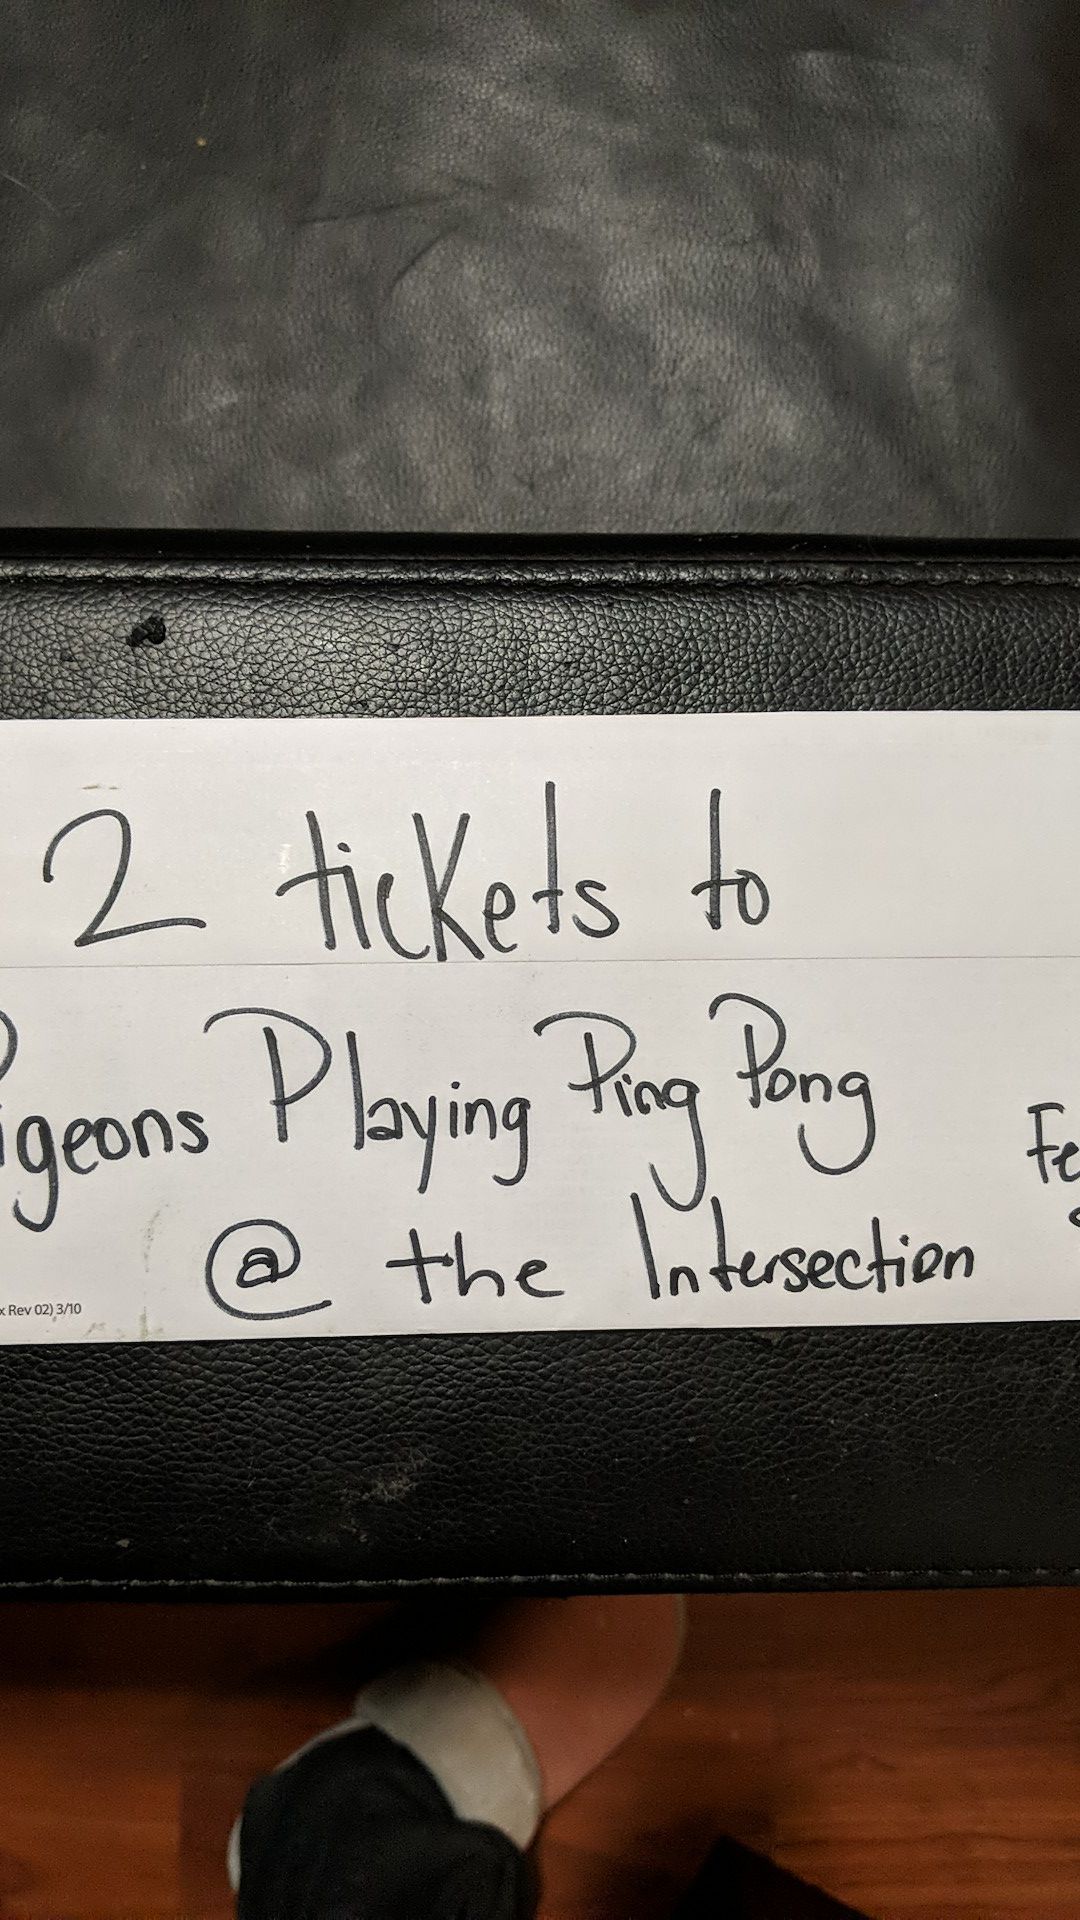 2 Tickets to Pigeons Playing Ping Pong